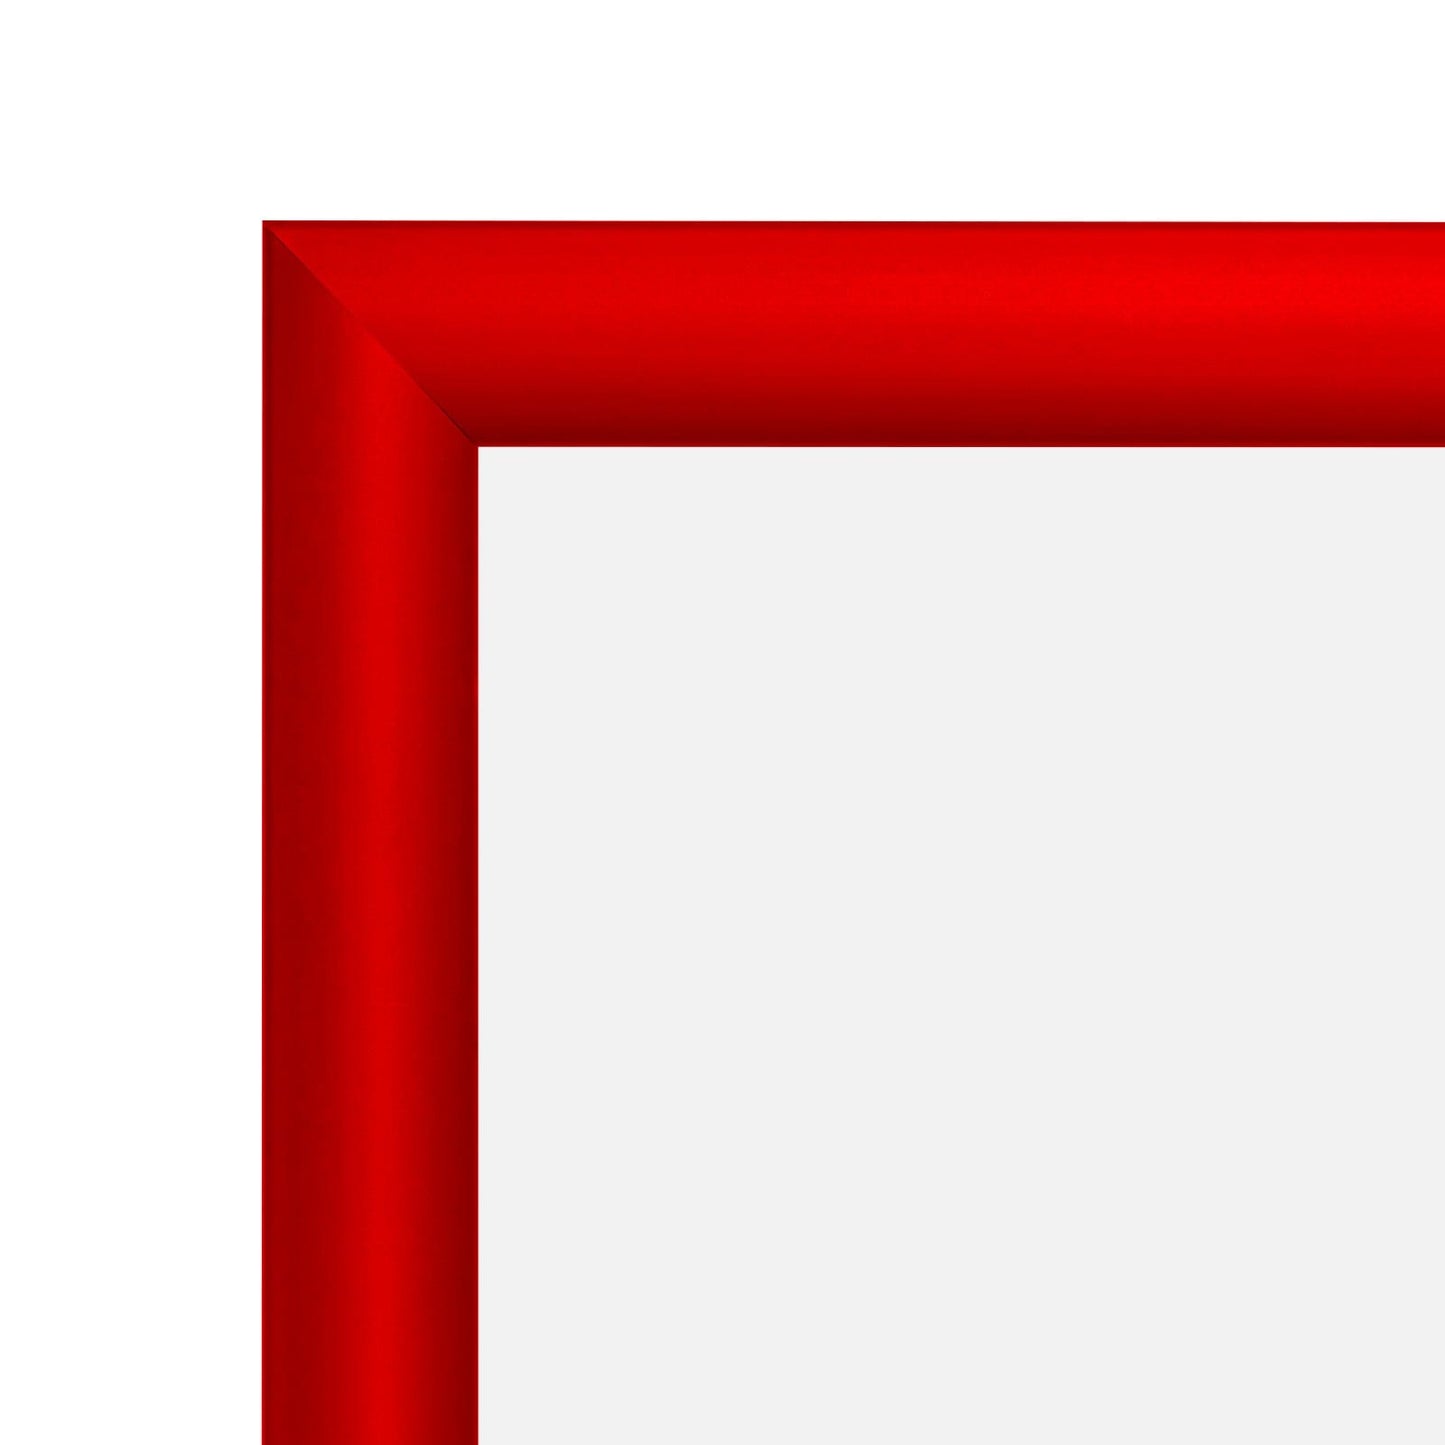 21x32 Red SnapeZo® Snap Frame - 1.2" Profile - Snap Frames Direct